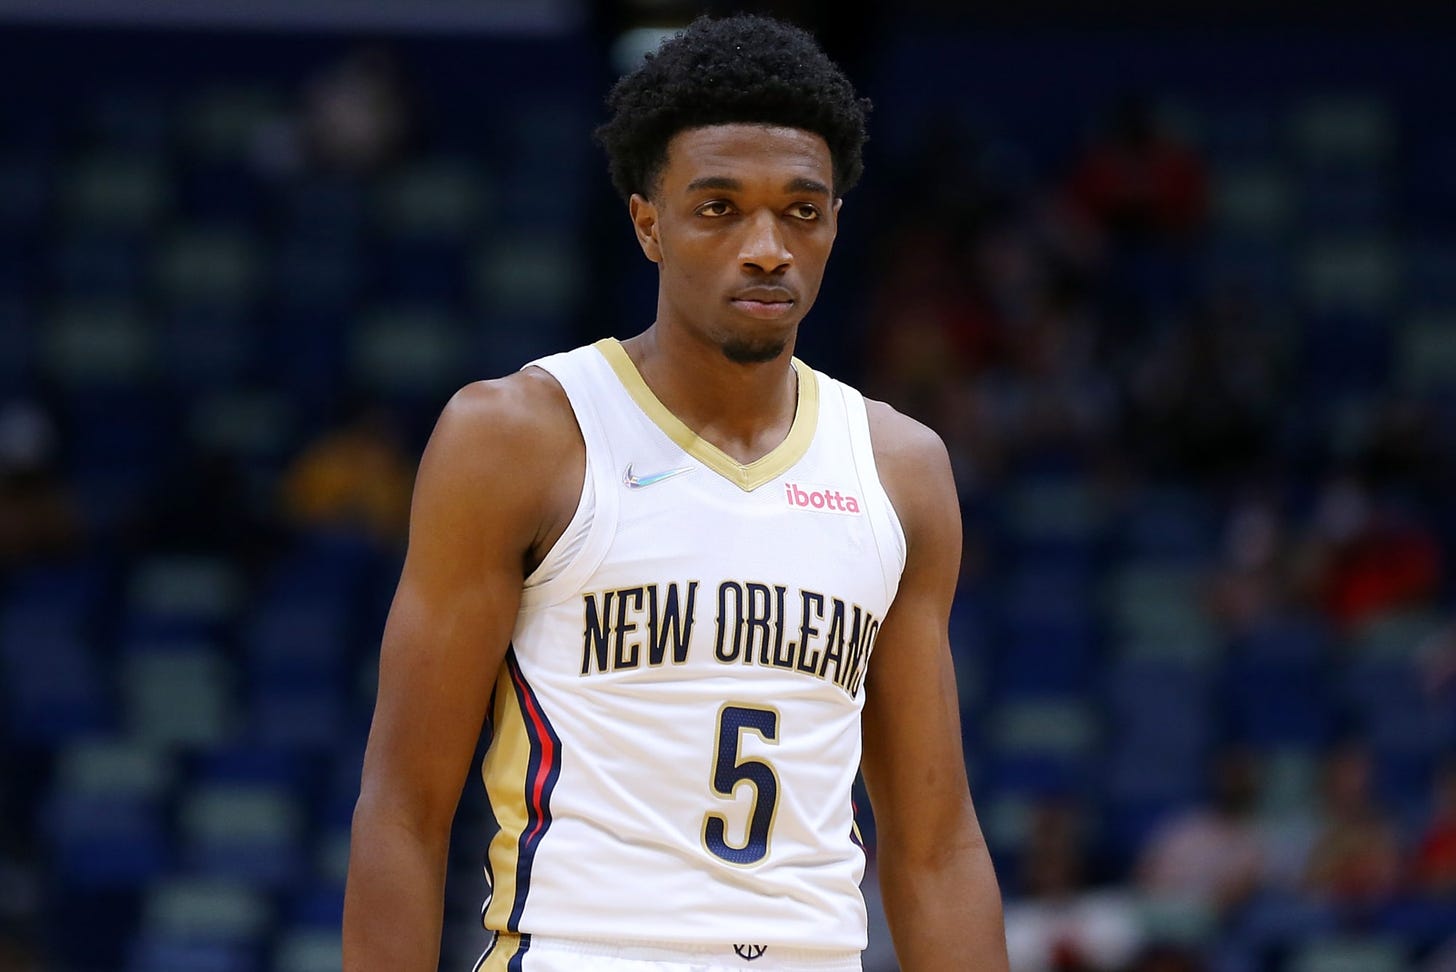 New Orleans Pelicans: How Herb Jones impacts the game without scoring